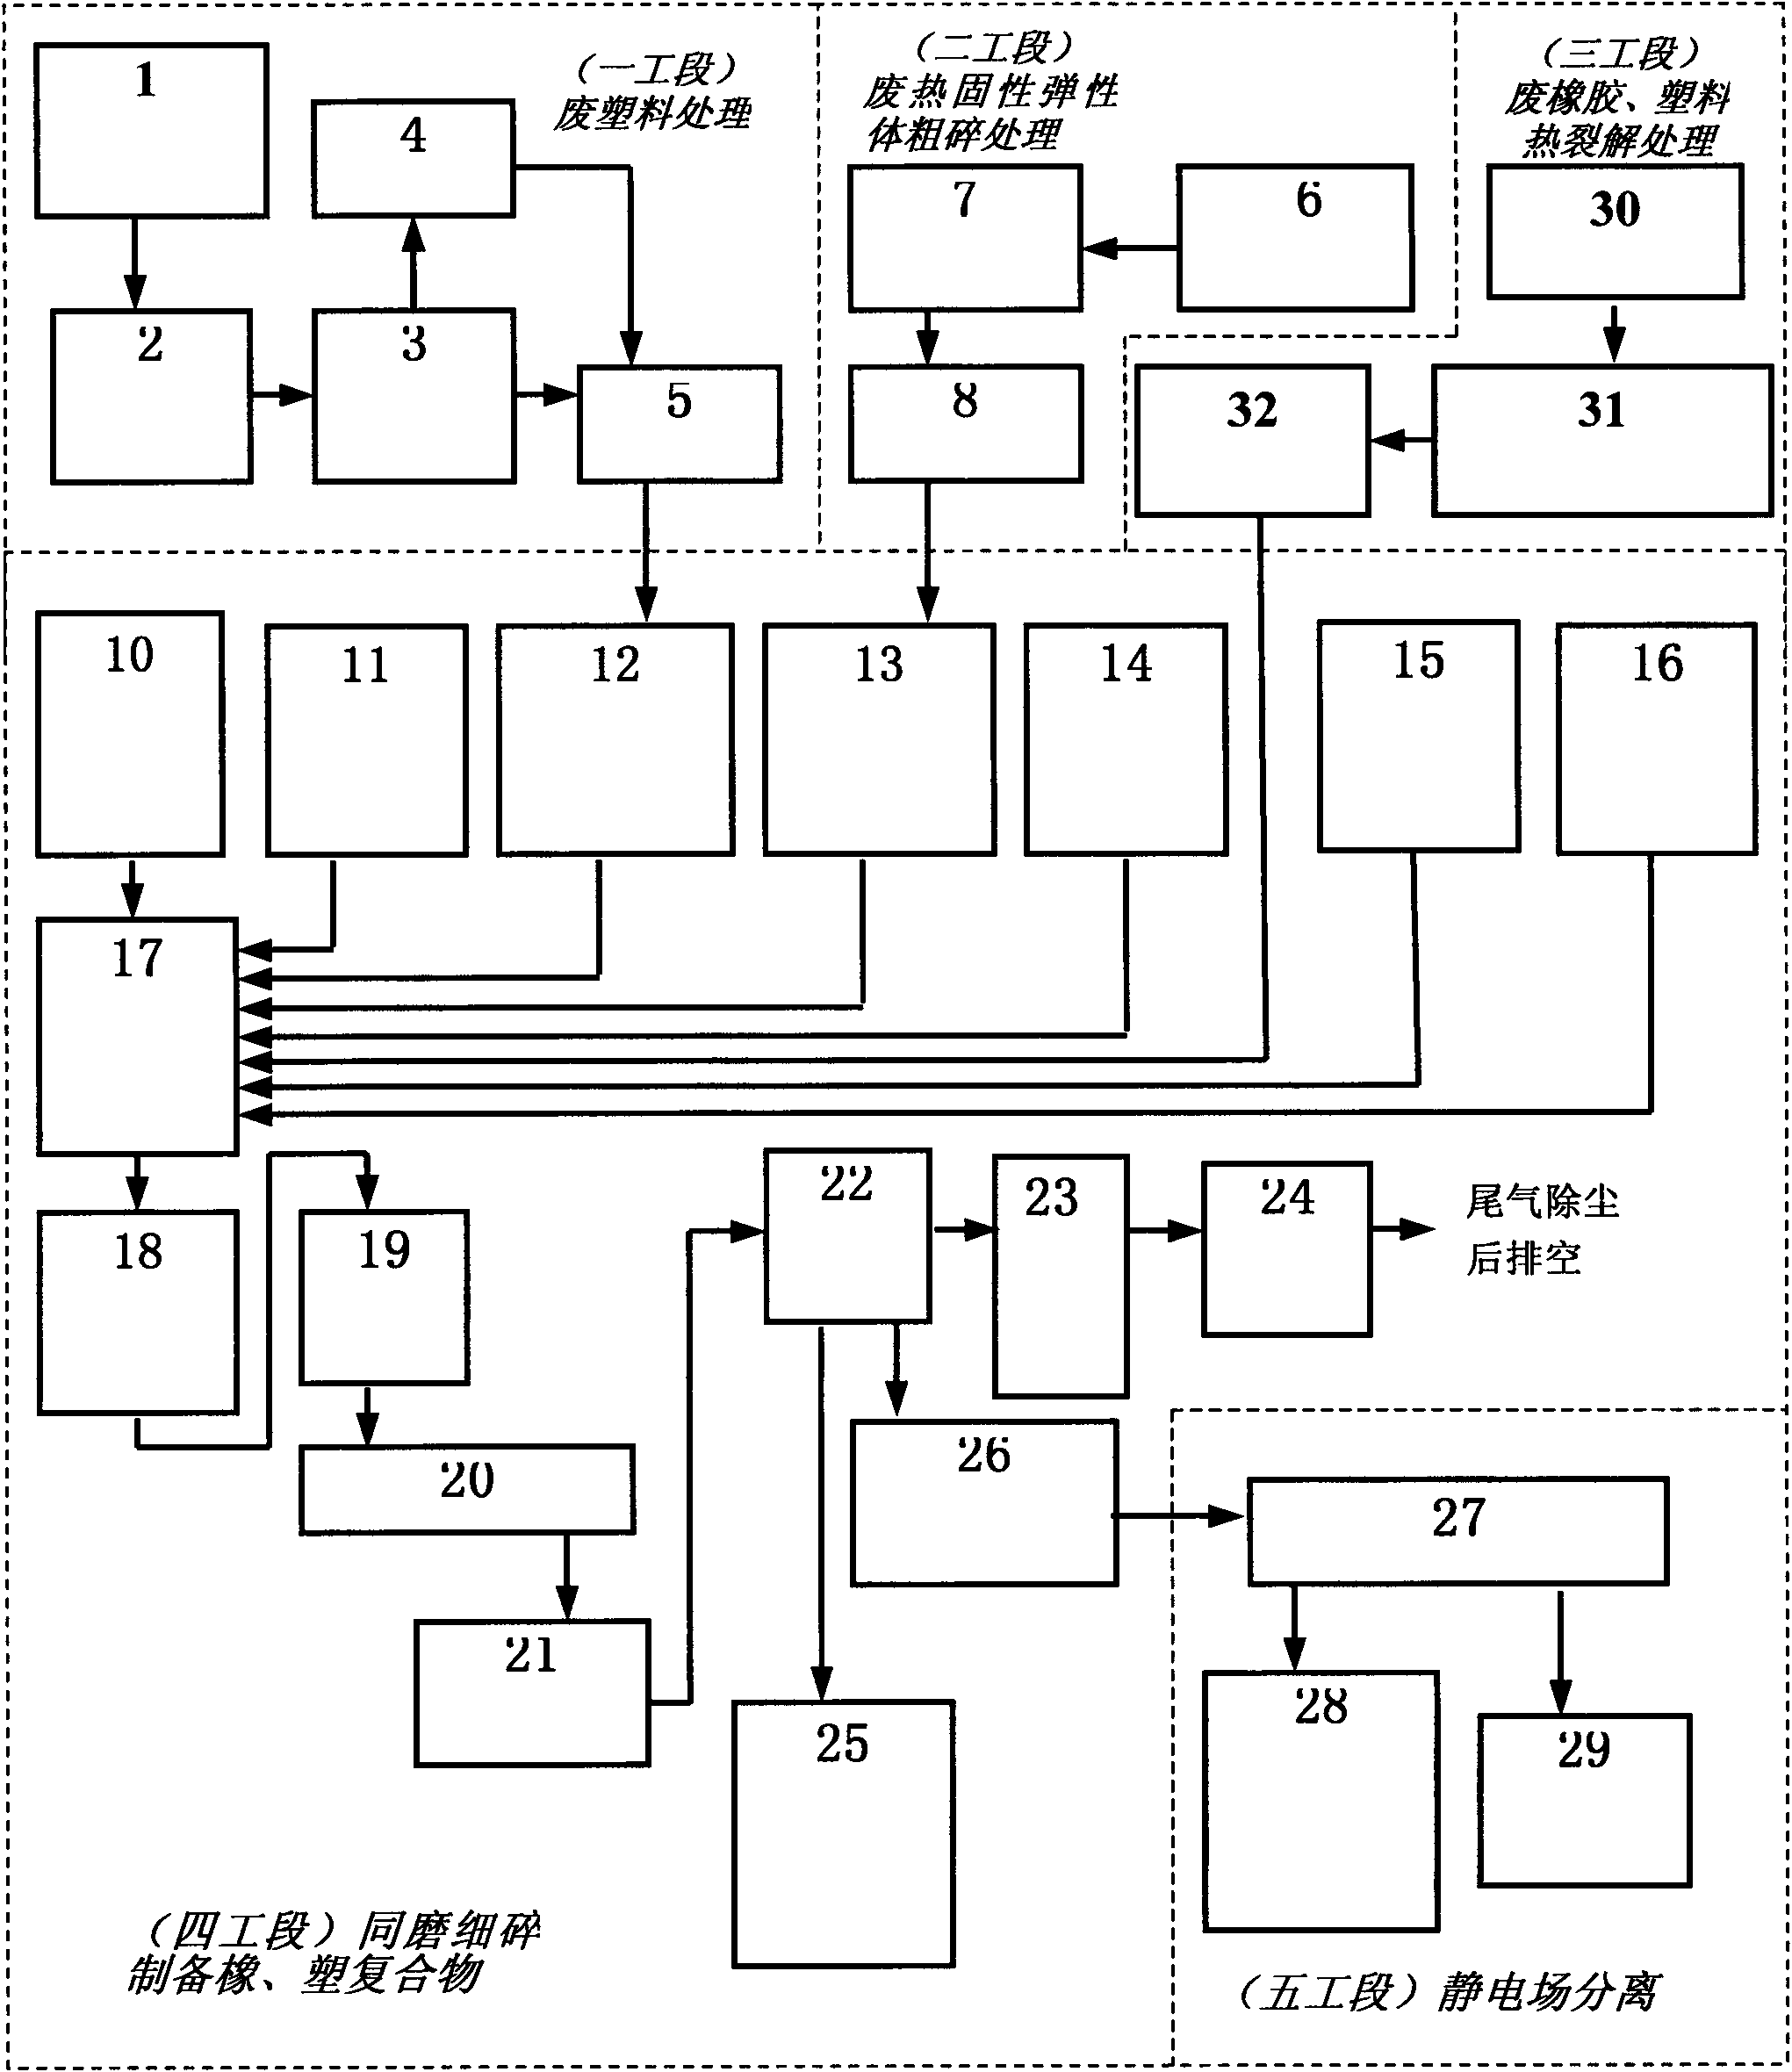 Combined equipment for preparing polymer compound by grinding method